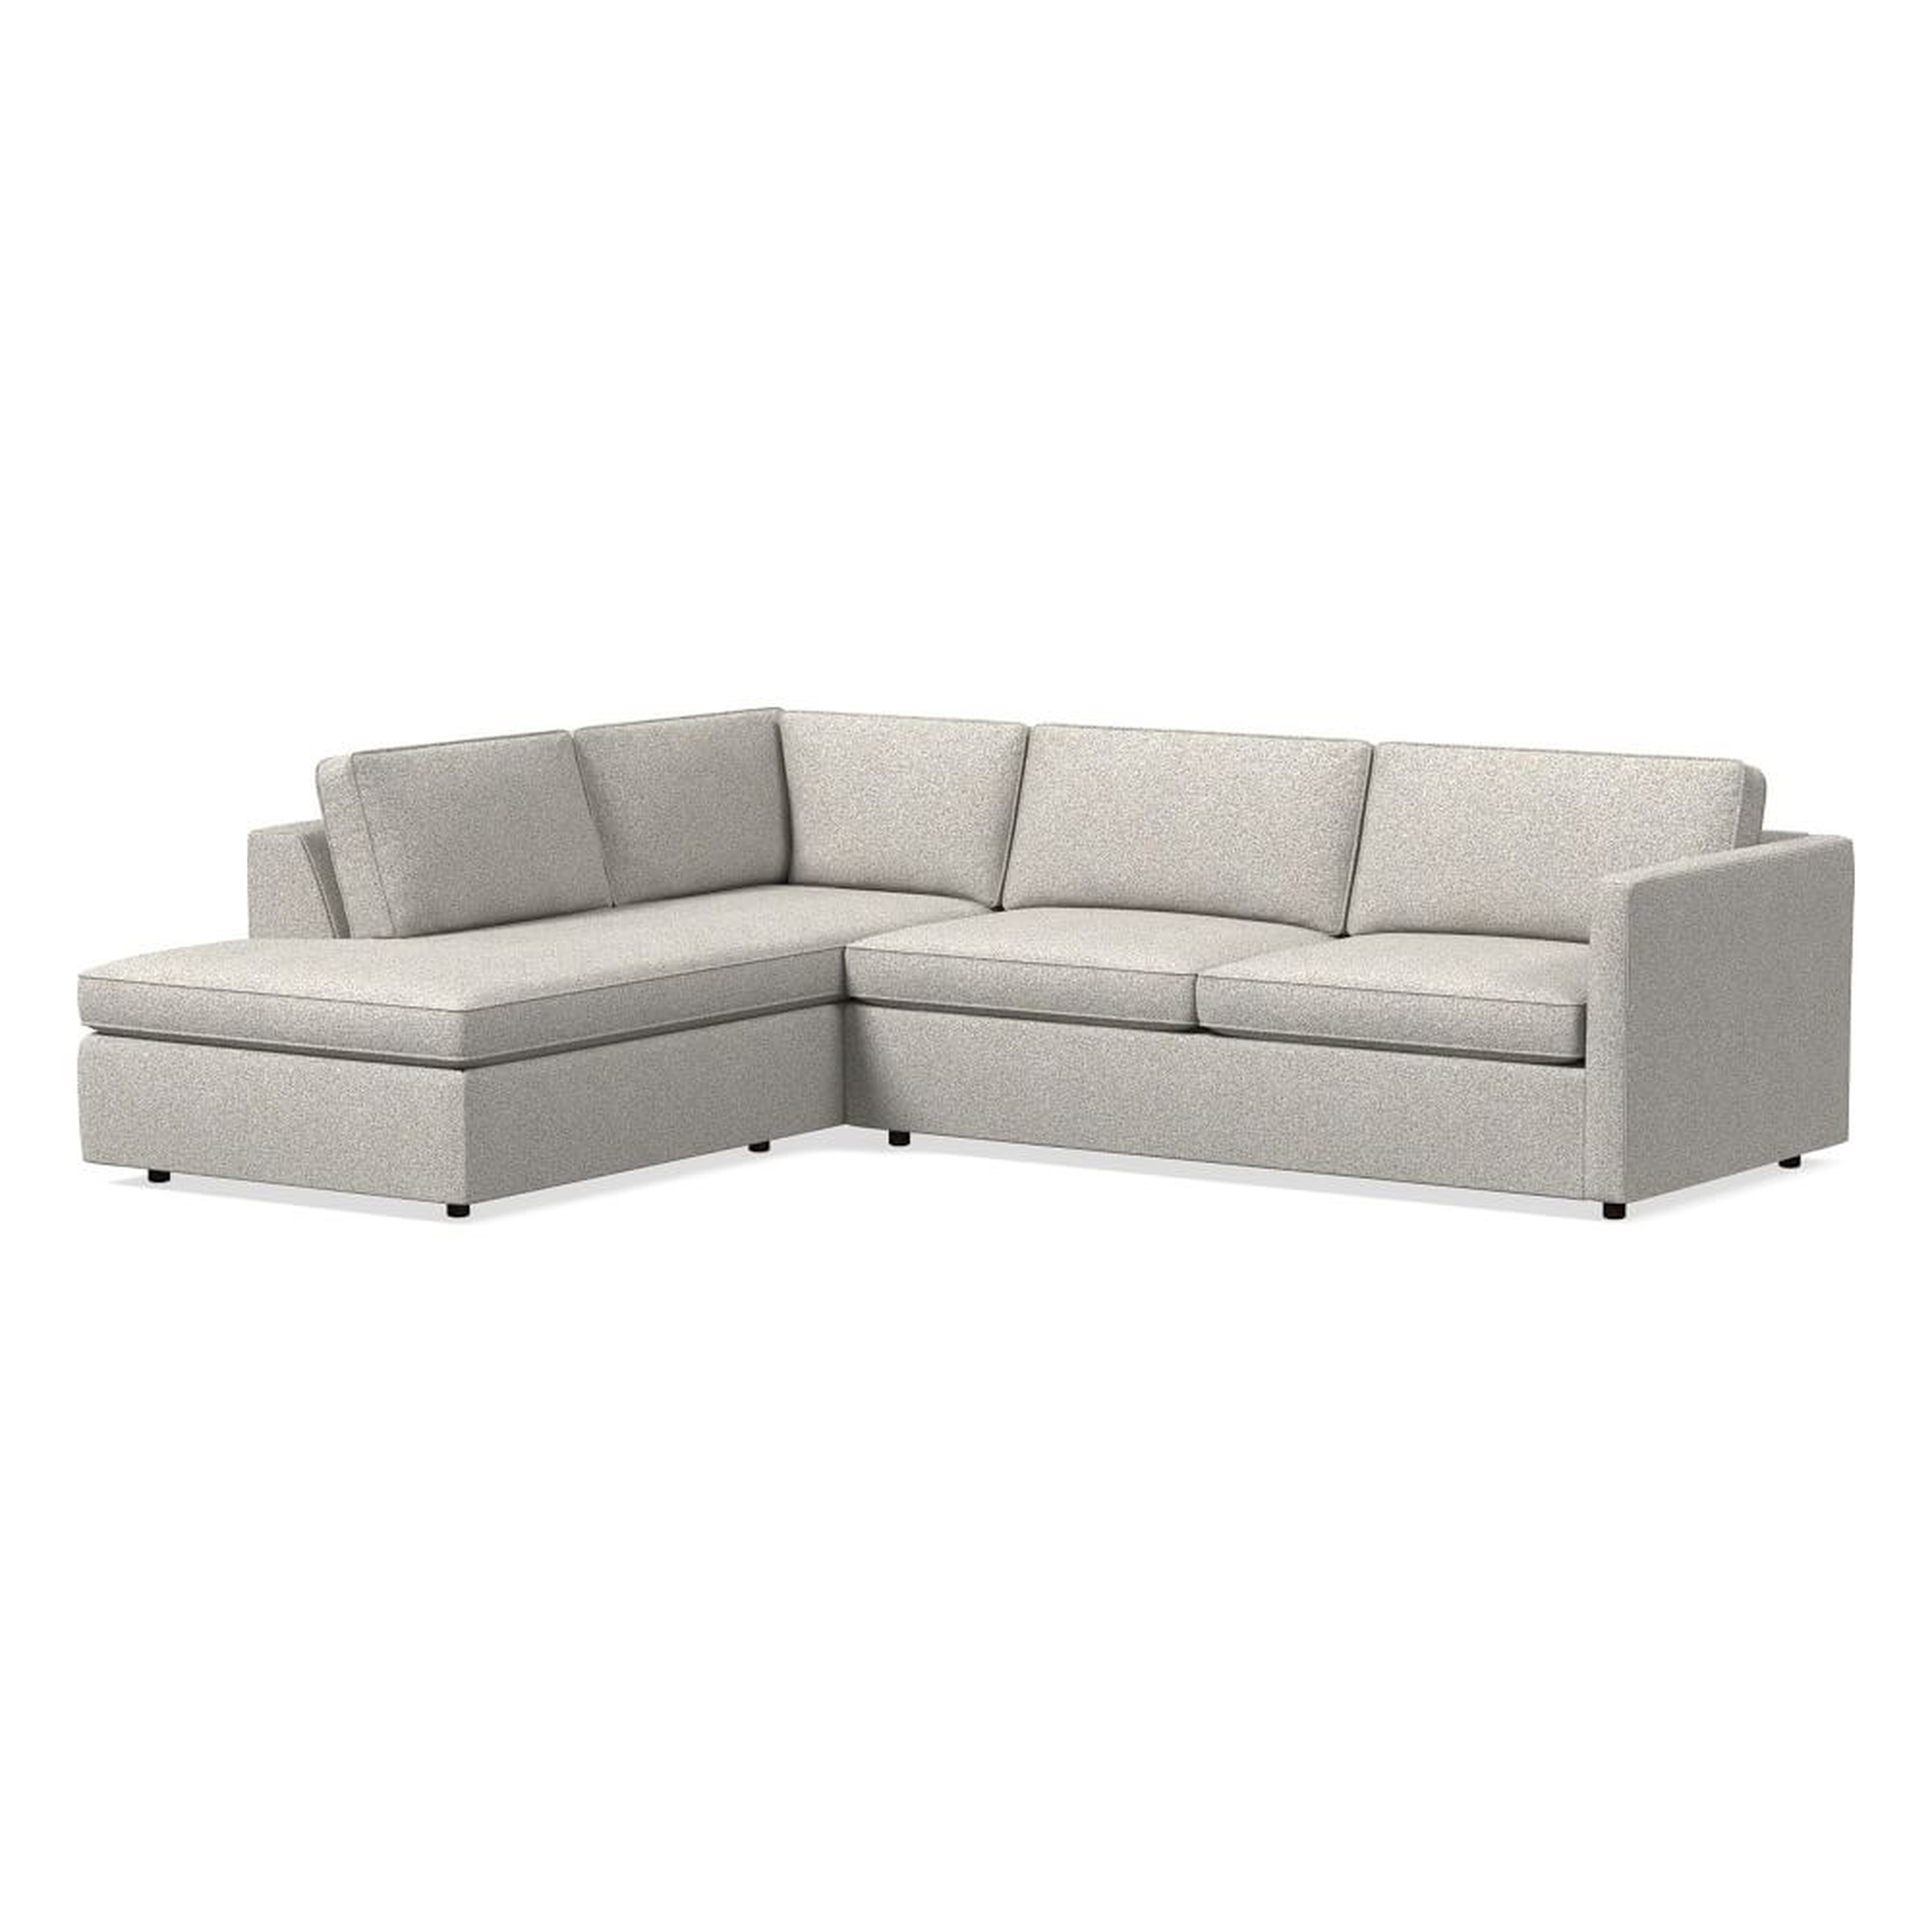 Harris 112" Left Multi-Seat Sleeper Sectional w/ Bumper Chaise, Chenille Tweed, Storm Gray - West Elm